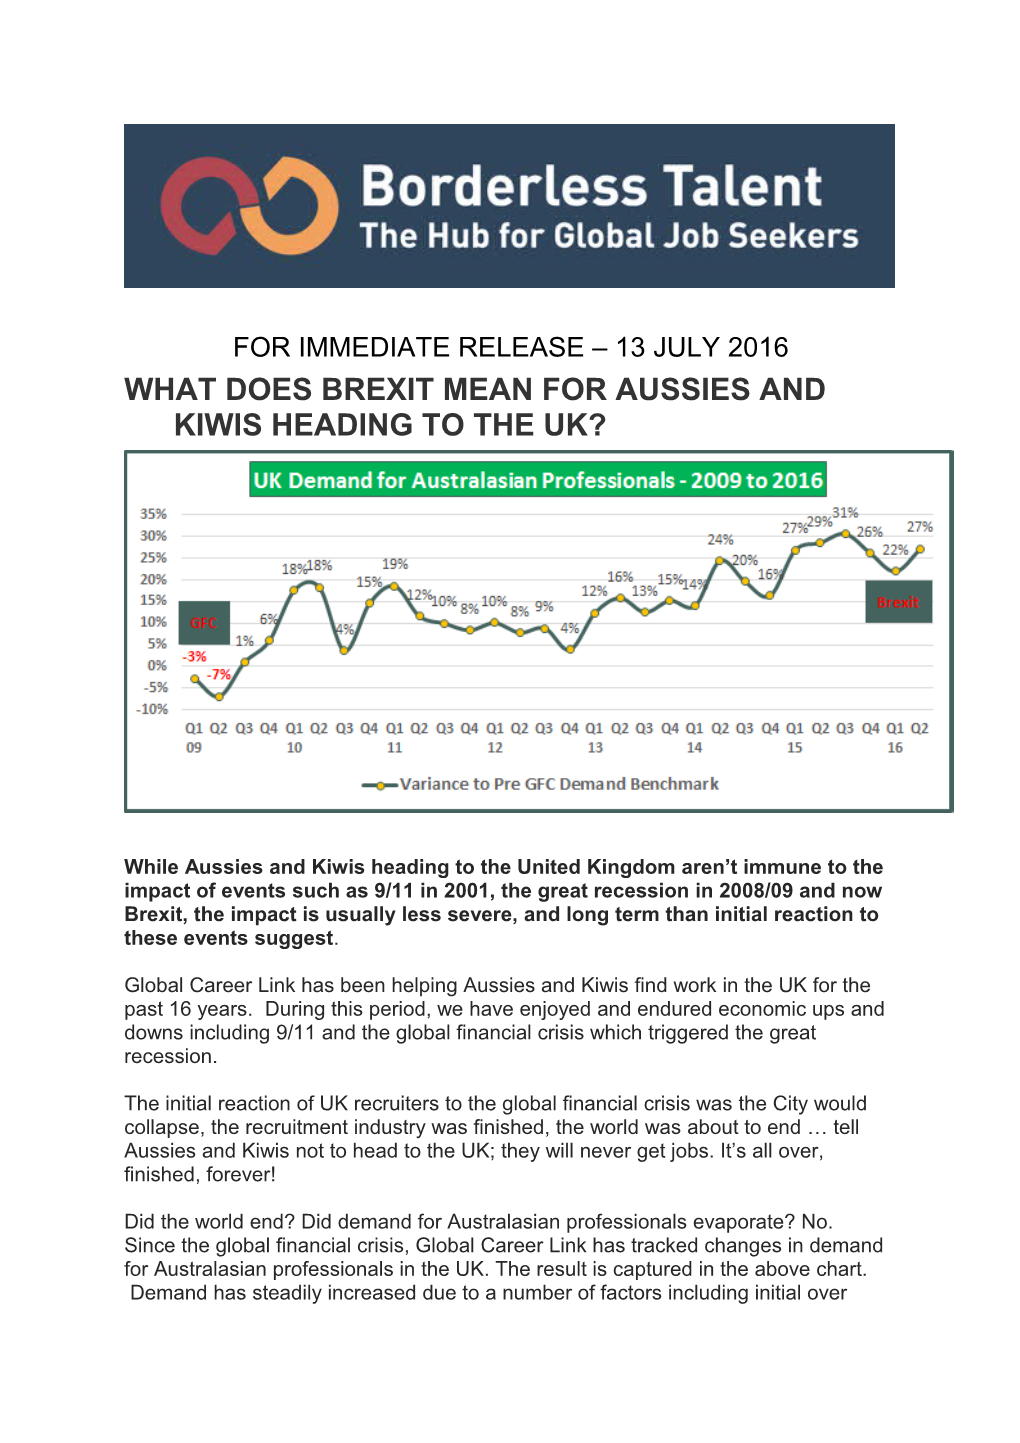 What Does Brexit Mean for Aussies and Kiwis Heading to the Uk?